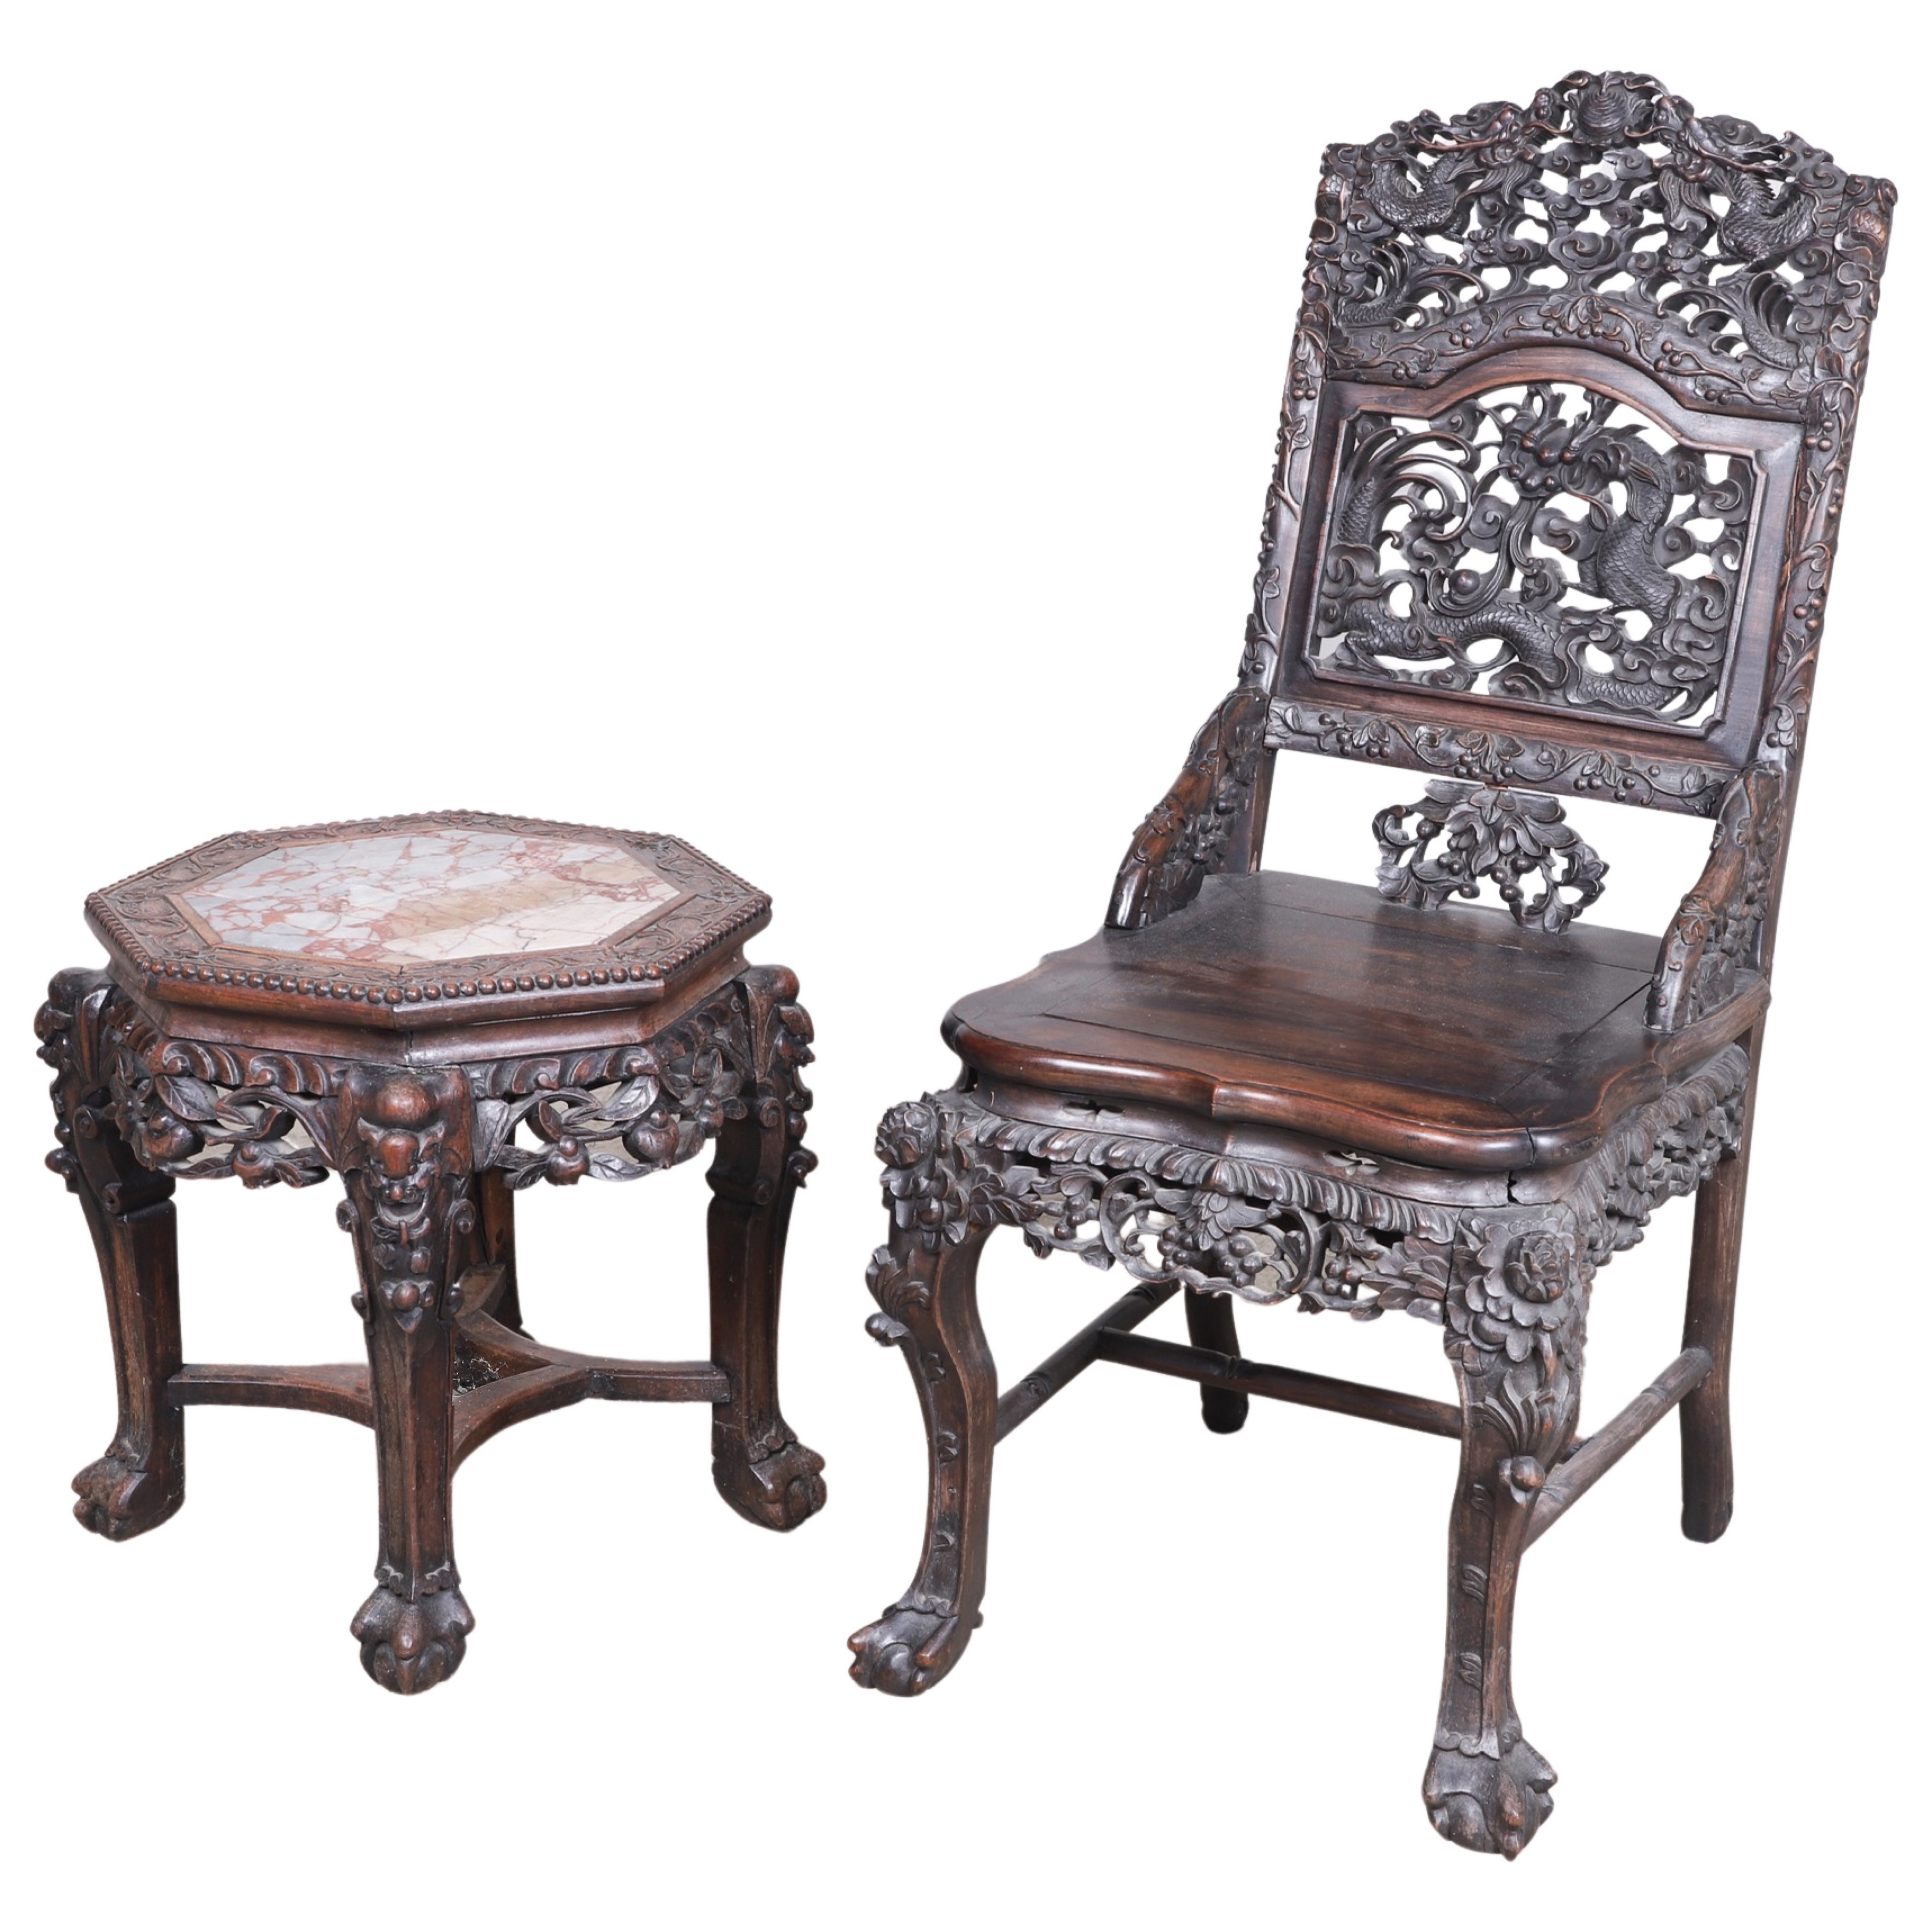 Chinese Carved Hardwood Side Chair 3b443a